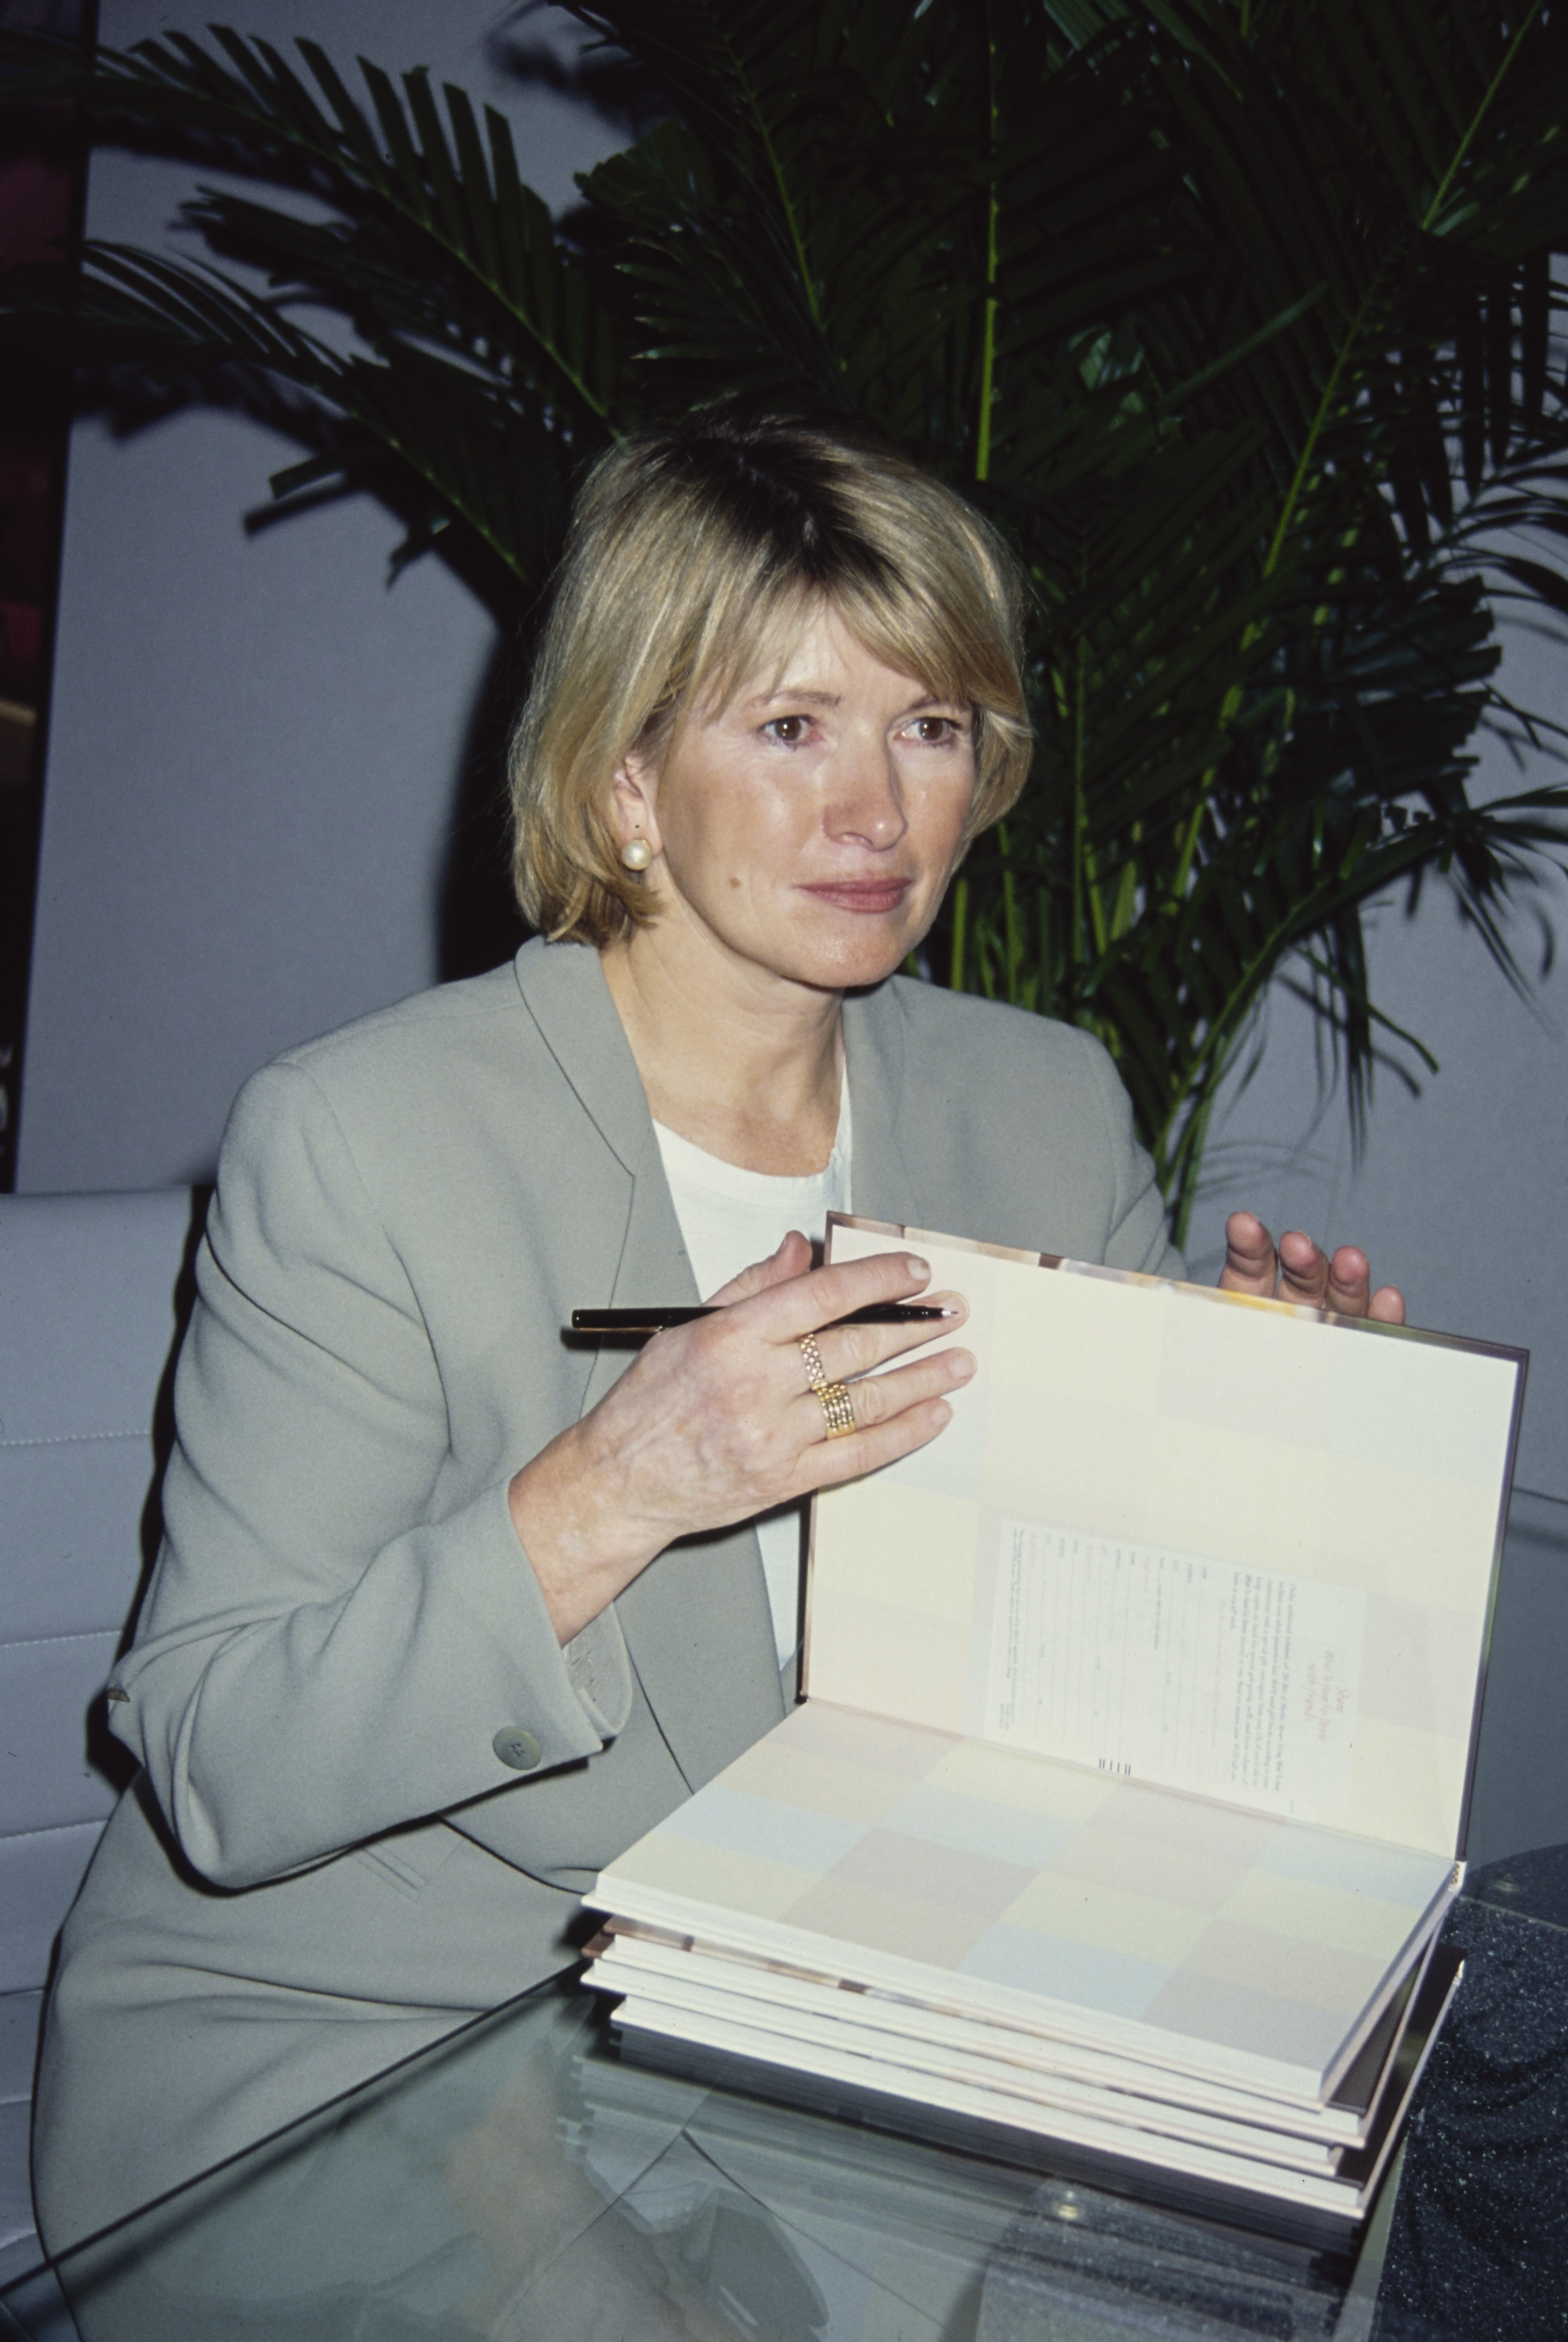 Martha Stewart attended the 33rd National Association of Television Program Executives (NATPE) Convention & Exhibition, held at the Sands Convention Center in Las Vegas, Nevada, in January 1996. | Source: Getty Images